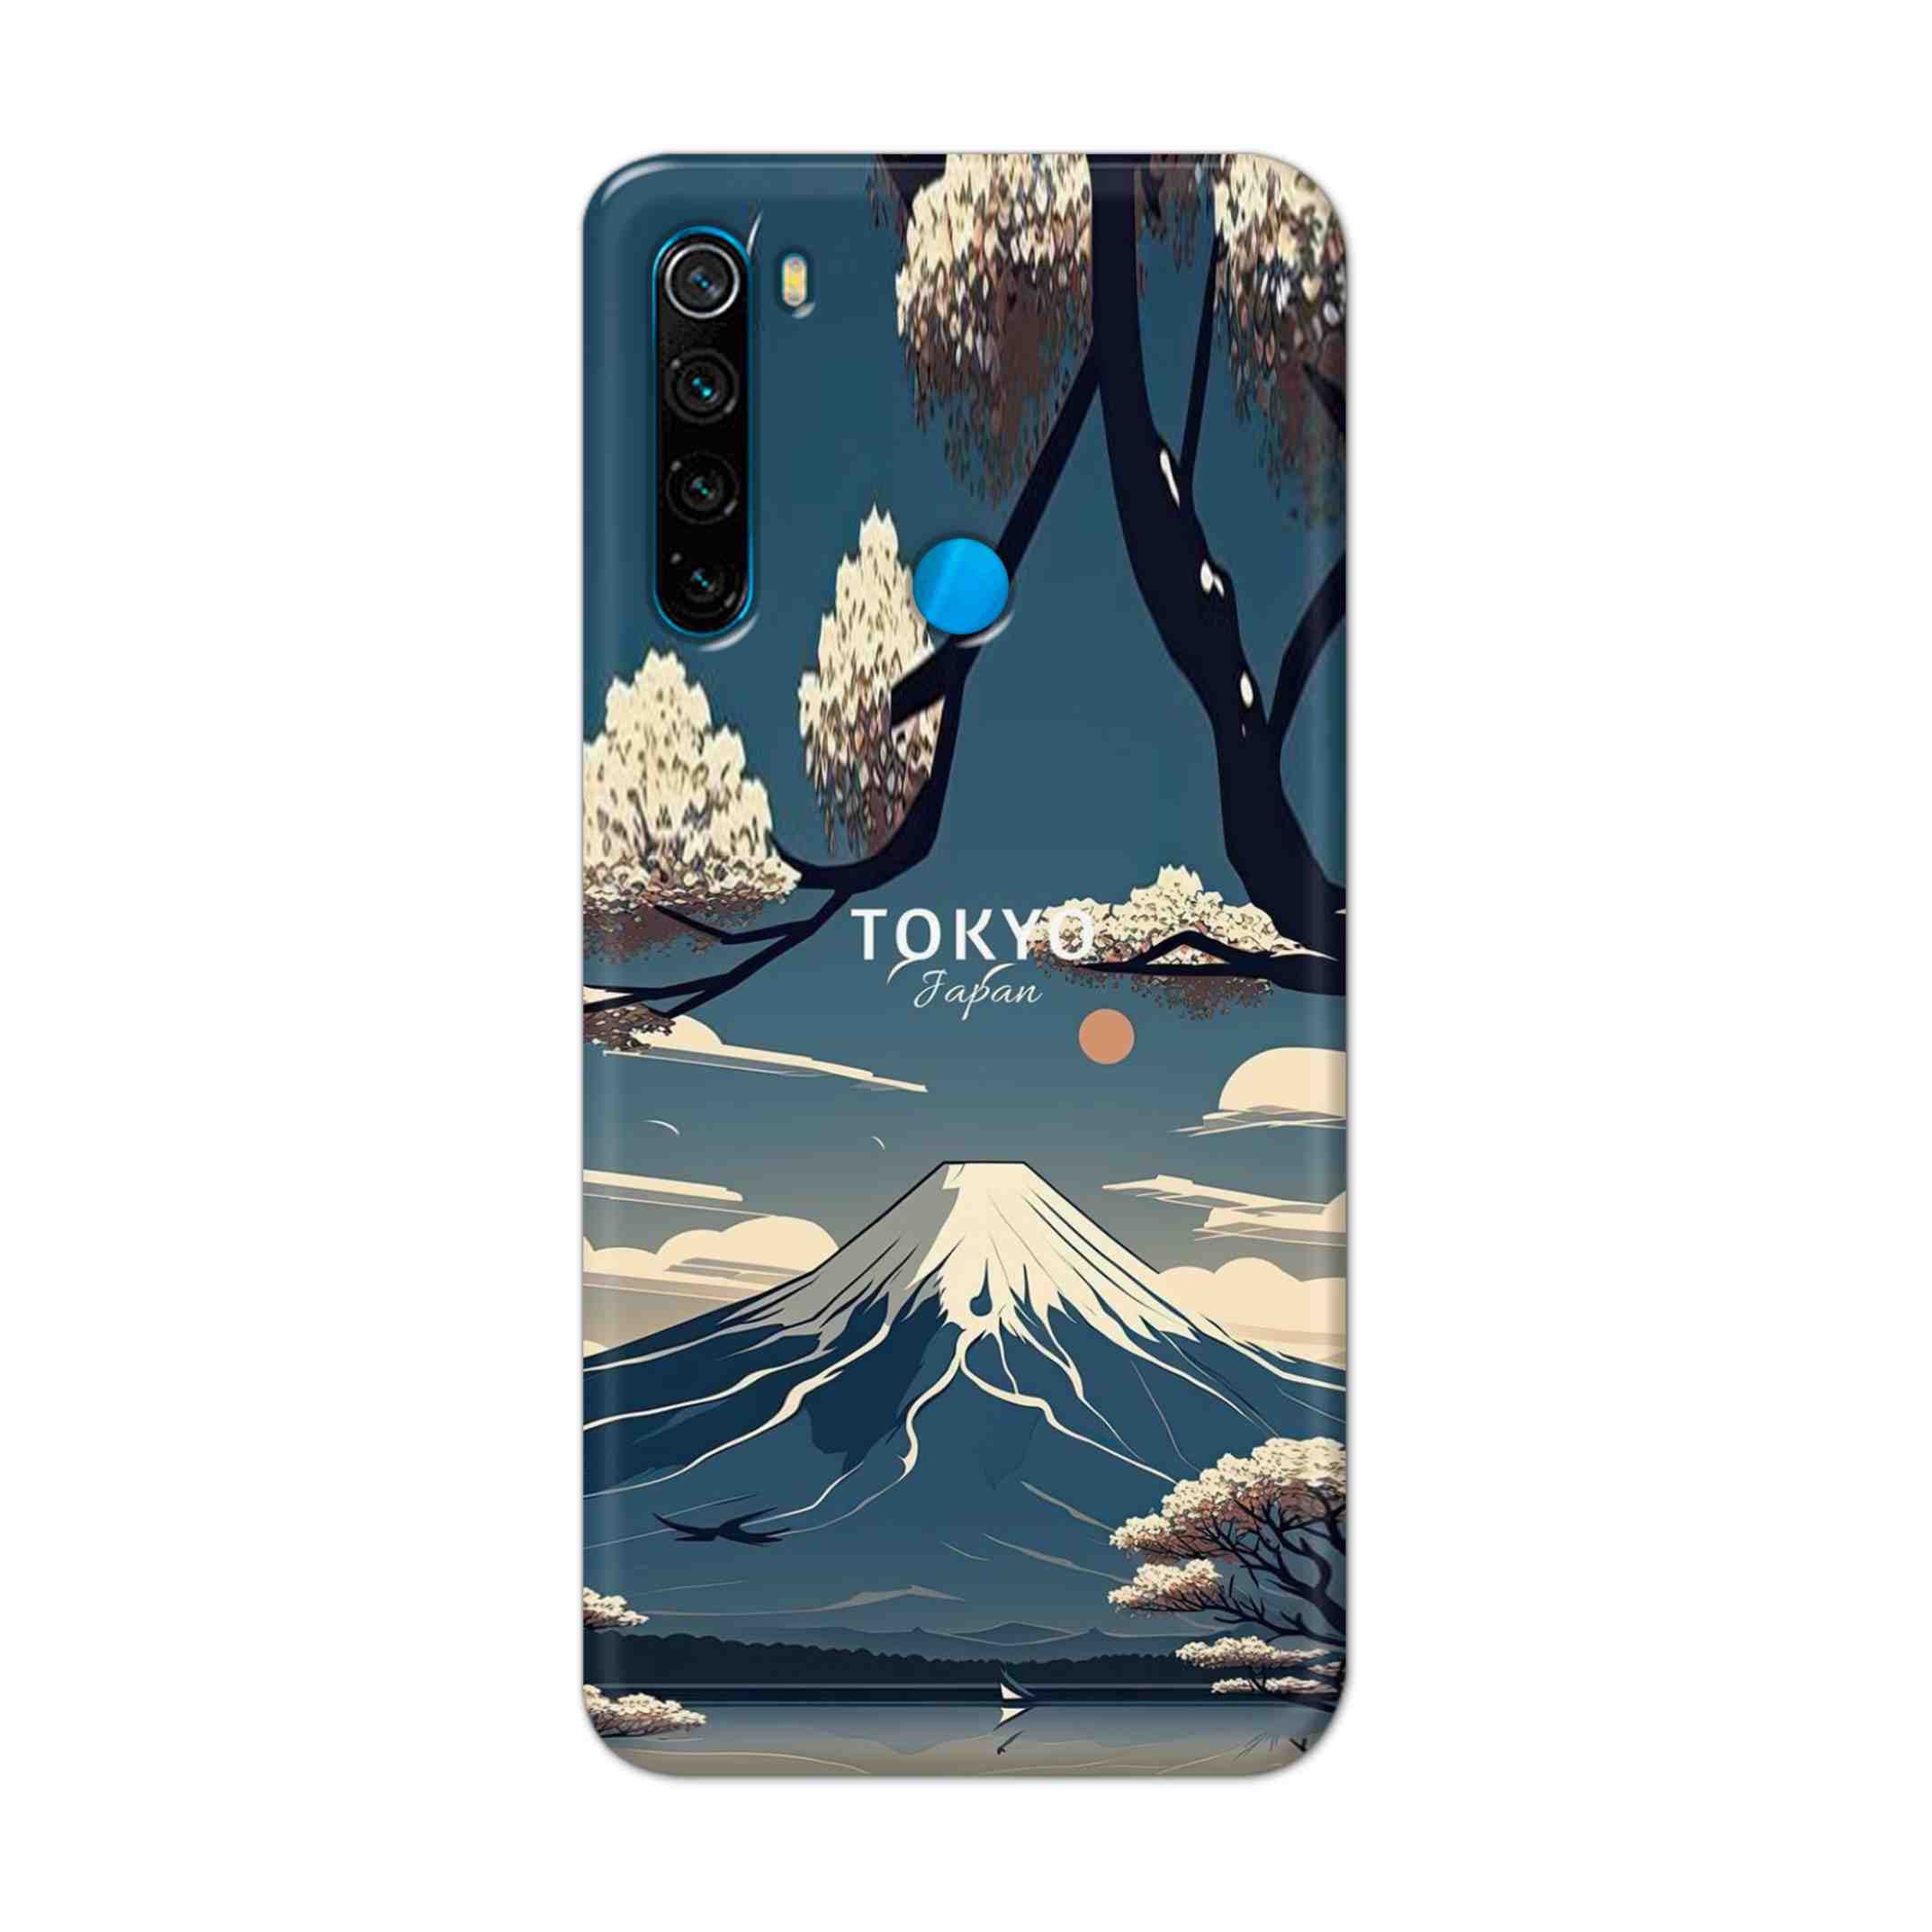 Buy Tokyo Hard Back Mobile Phone Case Cover For Xiaomi Redmi Note 8 Online